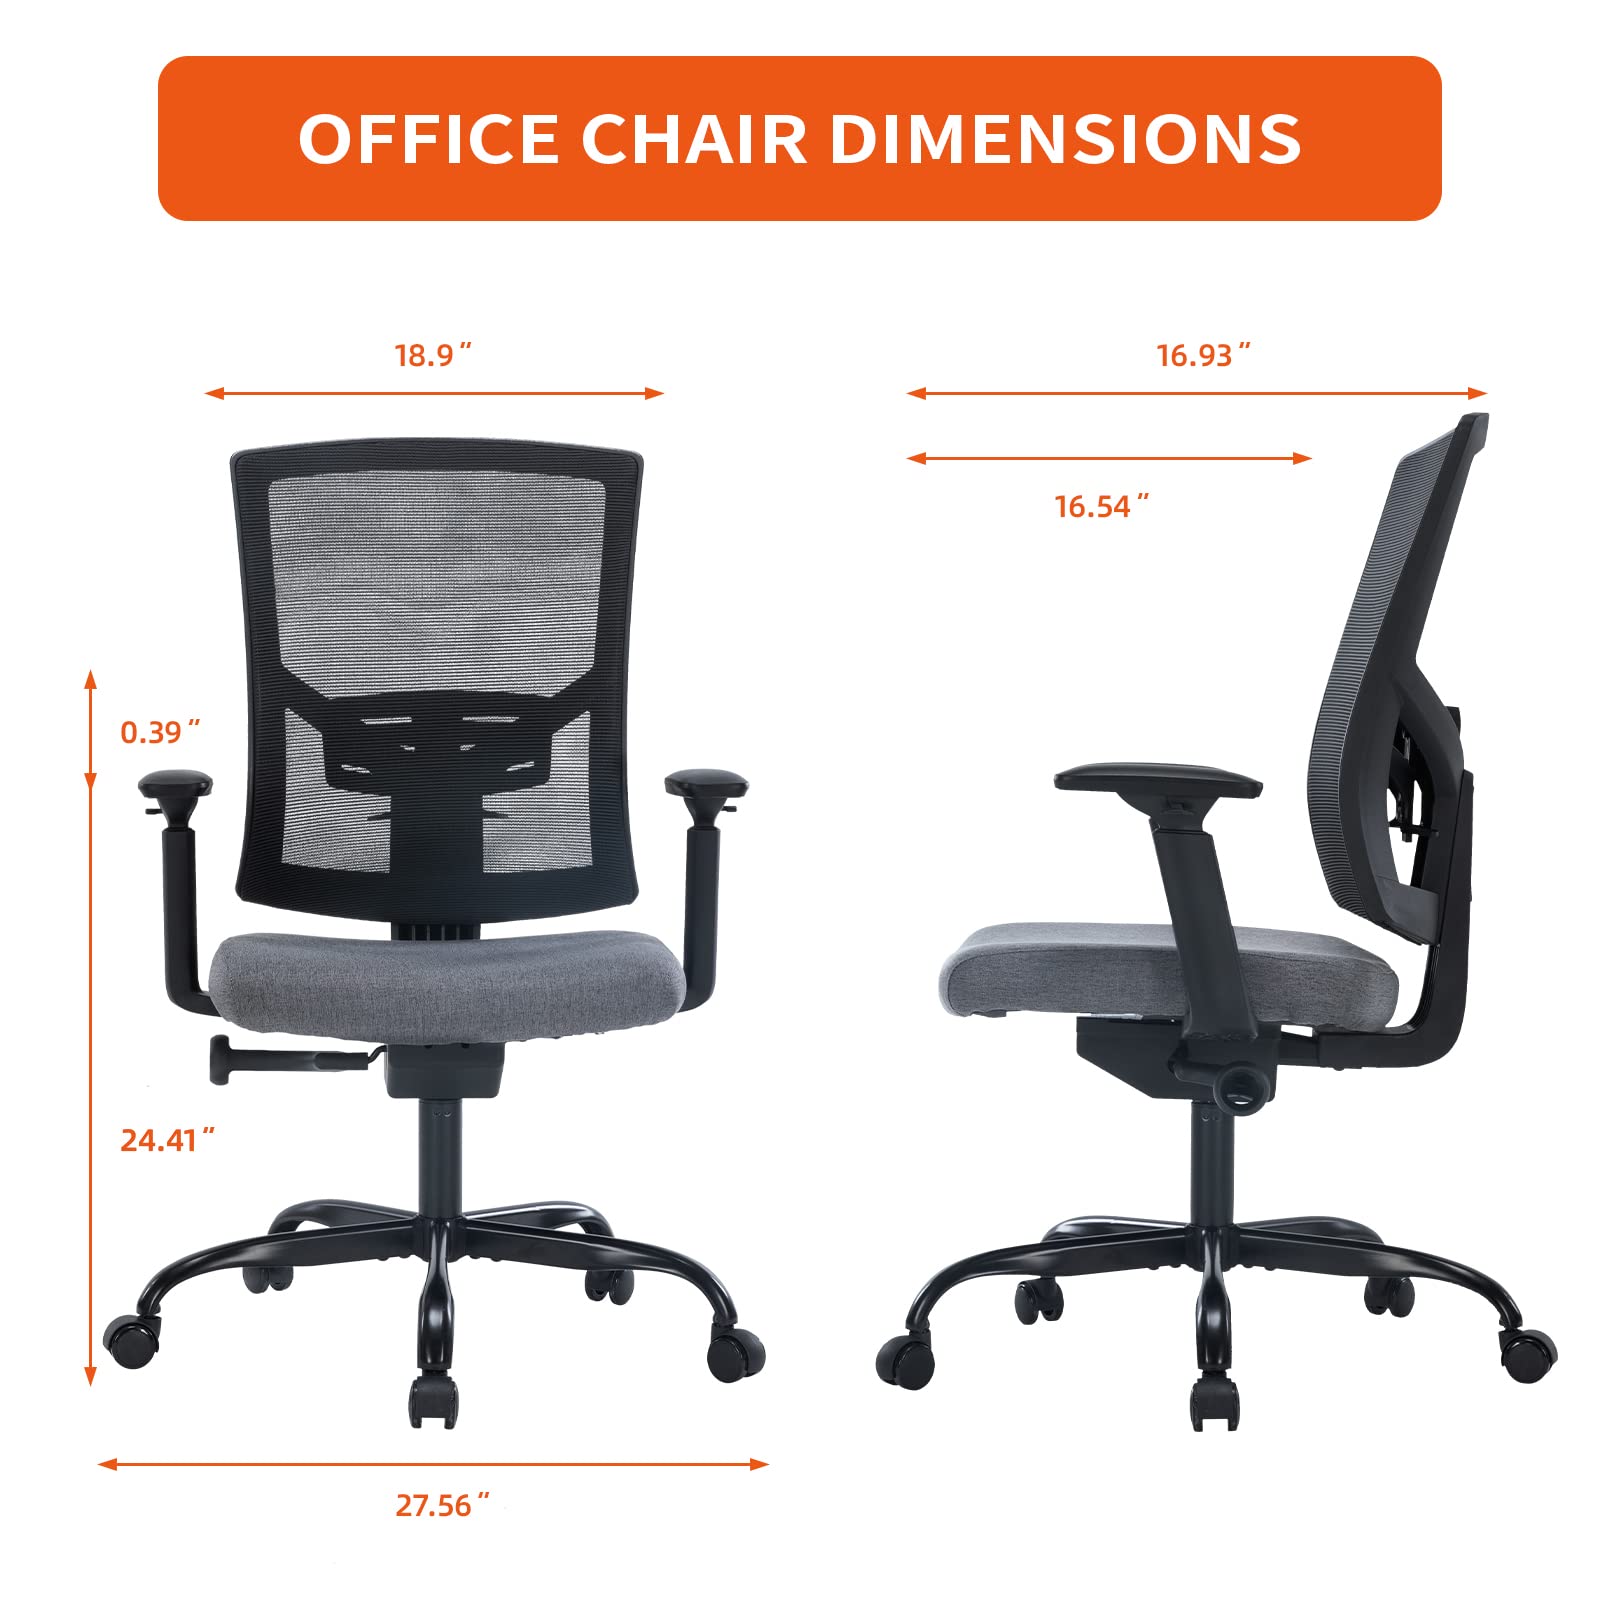 CLATINA Ergonomic Mesh Office Chair with Lumbar Support, Computer Desk Chair with Armrests and Sponge Cushion Seat for Working and Resting, Black